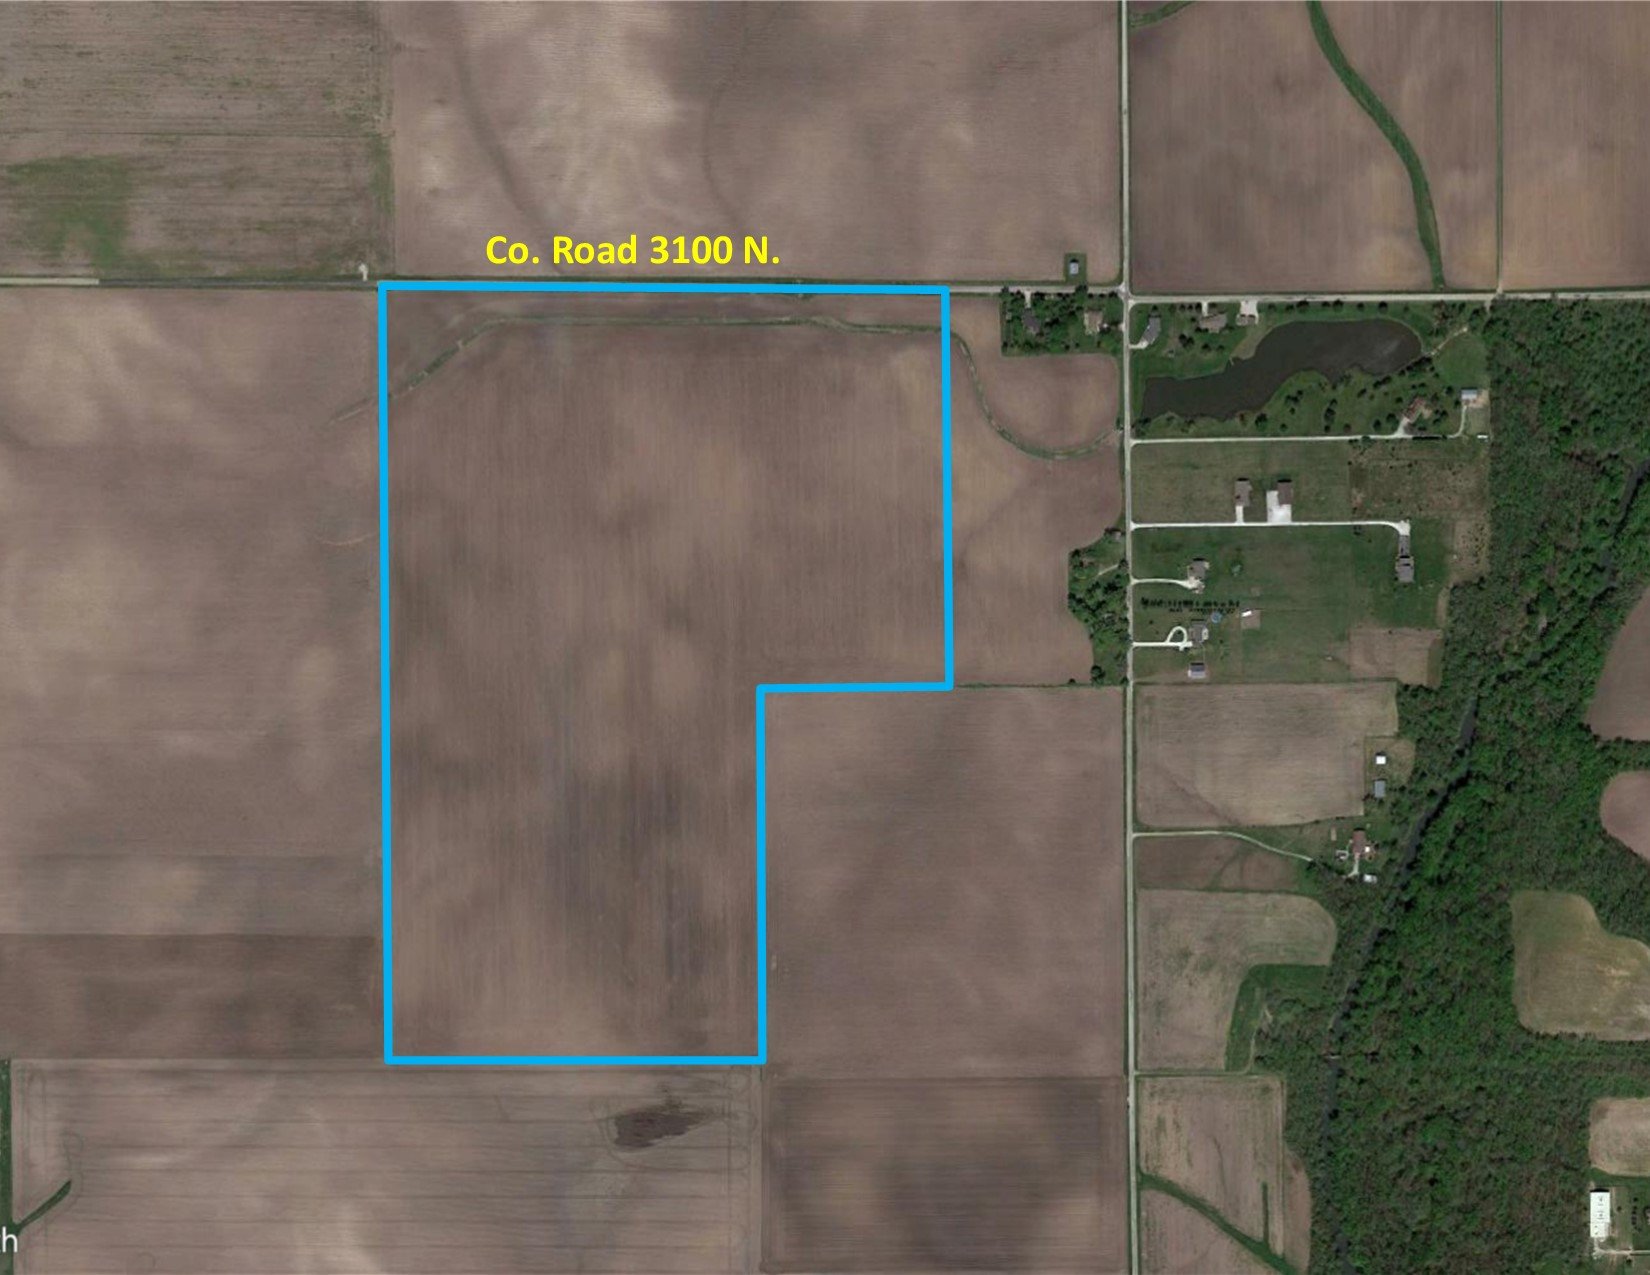 auctions-land-champaign-county-illinois-100-acres-listing-number-16443-Stanhope google close outlined JPEG-0.jpg